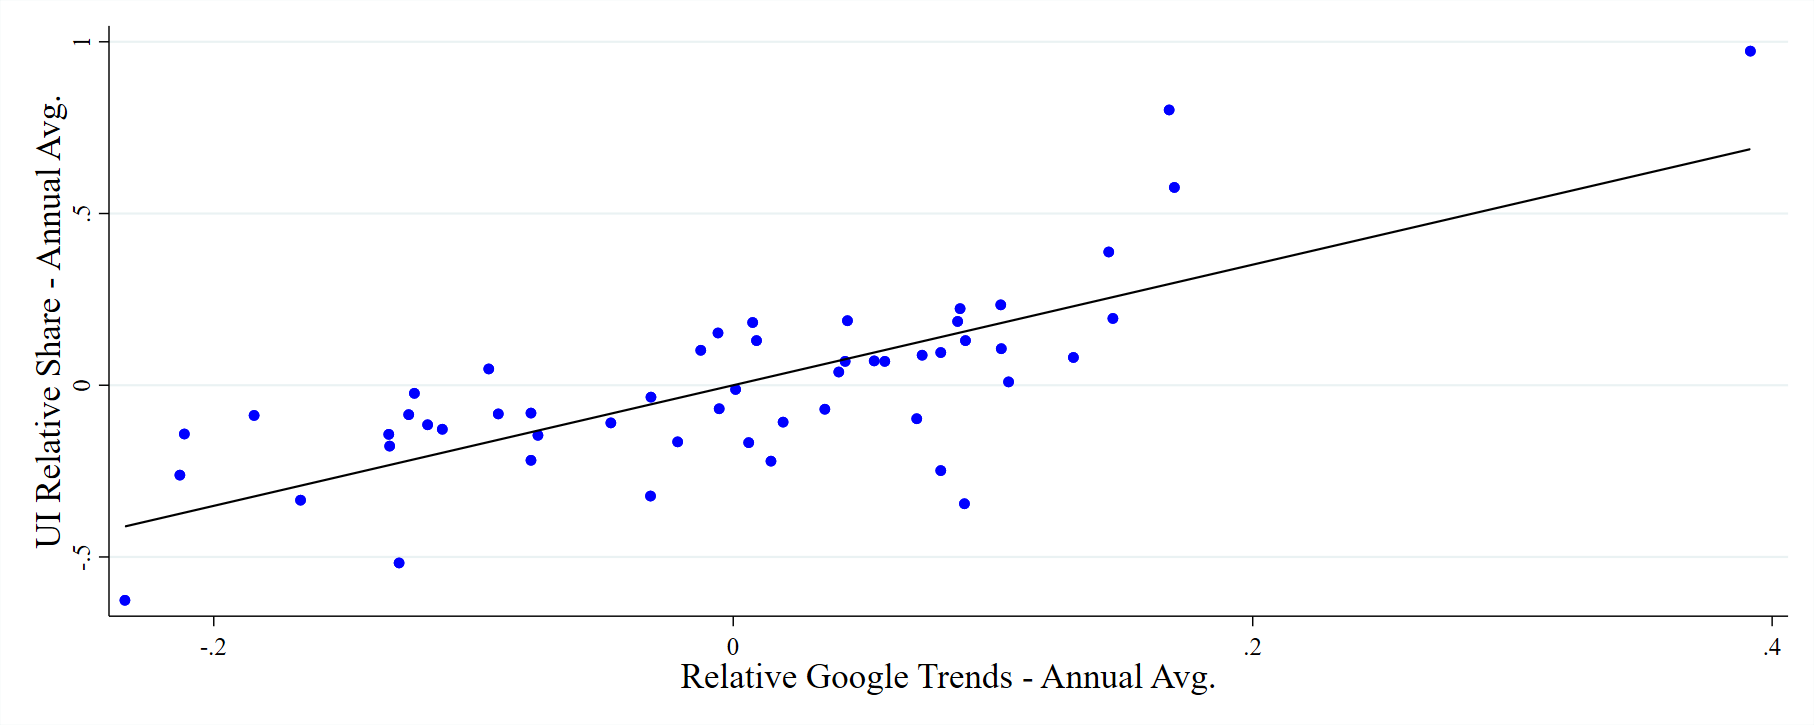 Figure 2 displays a scatter plot with a line of best fit. The y-axis contains the log ratio of initial UI claims in the state of Florida relative to the U.S. less the annual average over the sample period. It labels from -0.5 to 1 in increments of 0.5. The x-axis contains the log ratio of Google Trends in the state of Florida relative to the U.S. less the annual average over the sample period. It labels from -0.2 to 0.4 in increments of 0.2. Each dot represents a week, spanning 6 months prior and 6 months post the Hurricane event. The dots formulate a cloud that indicates a positive linear relationship. This is represented by the line of best fit through the scatter plot, which has a slope of approximately 1. 